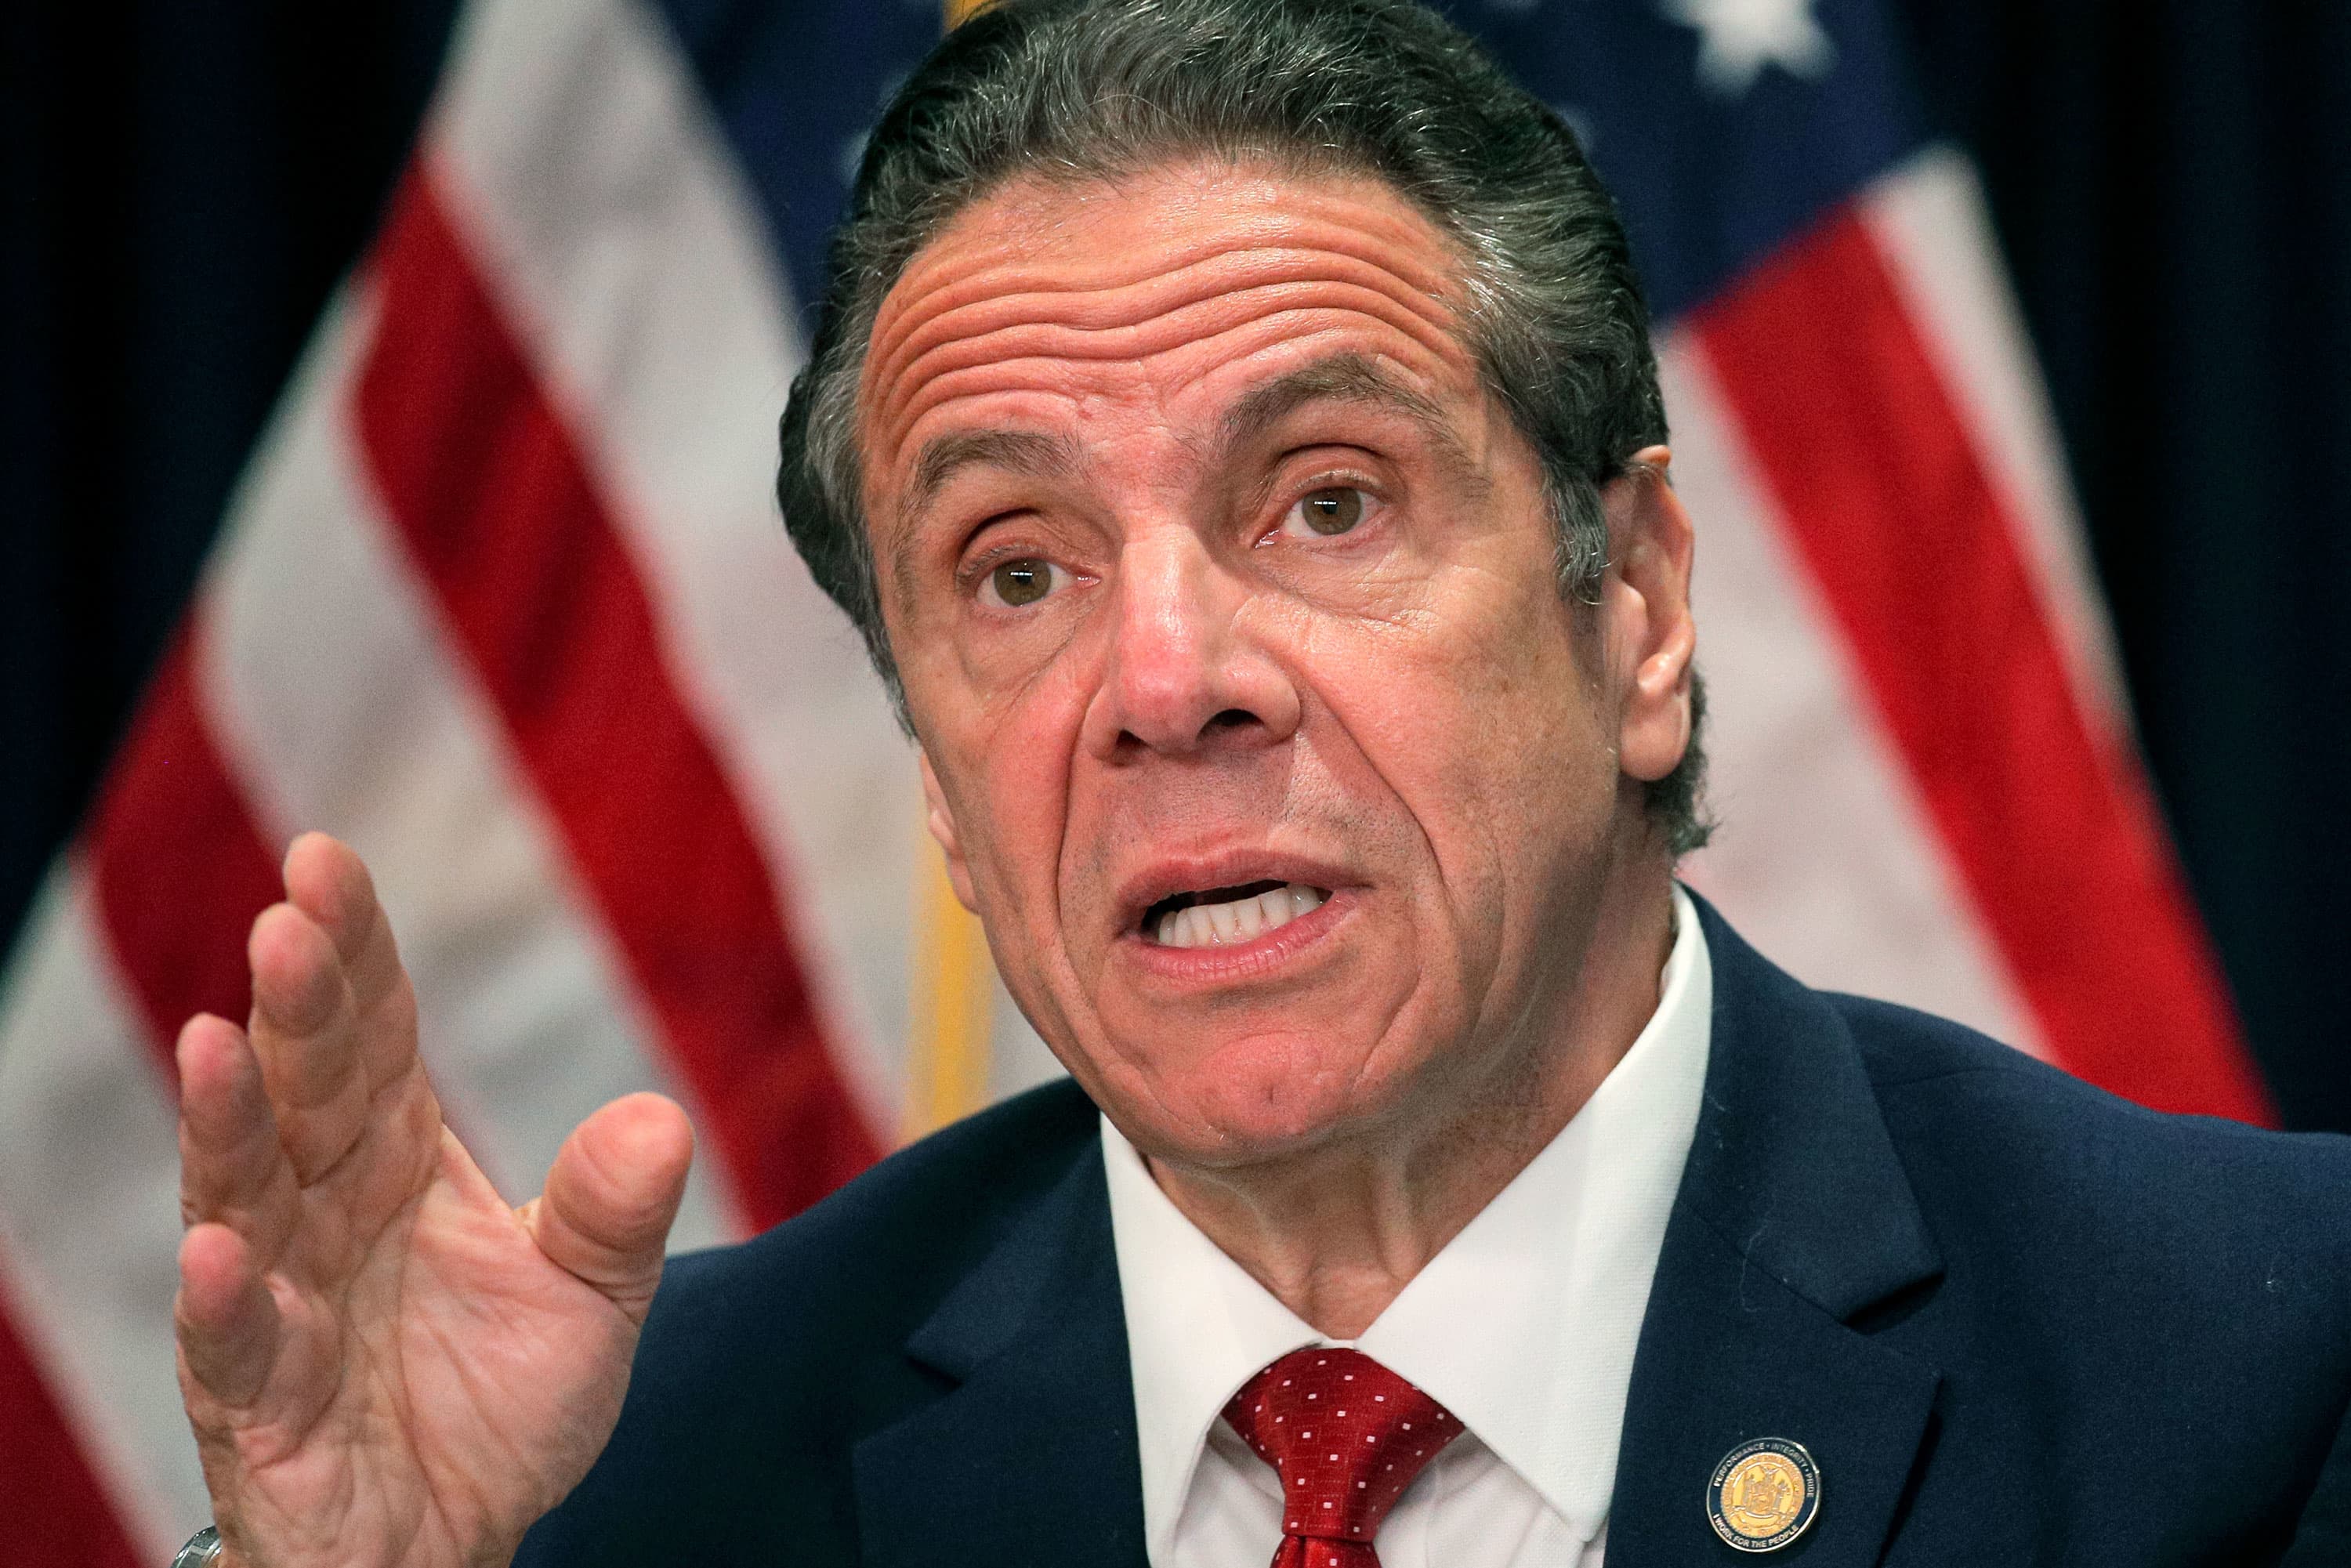 Former New York Gov. Andrew Cuomo ordered to repay $5 million in Covid book money